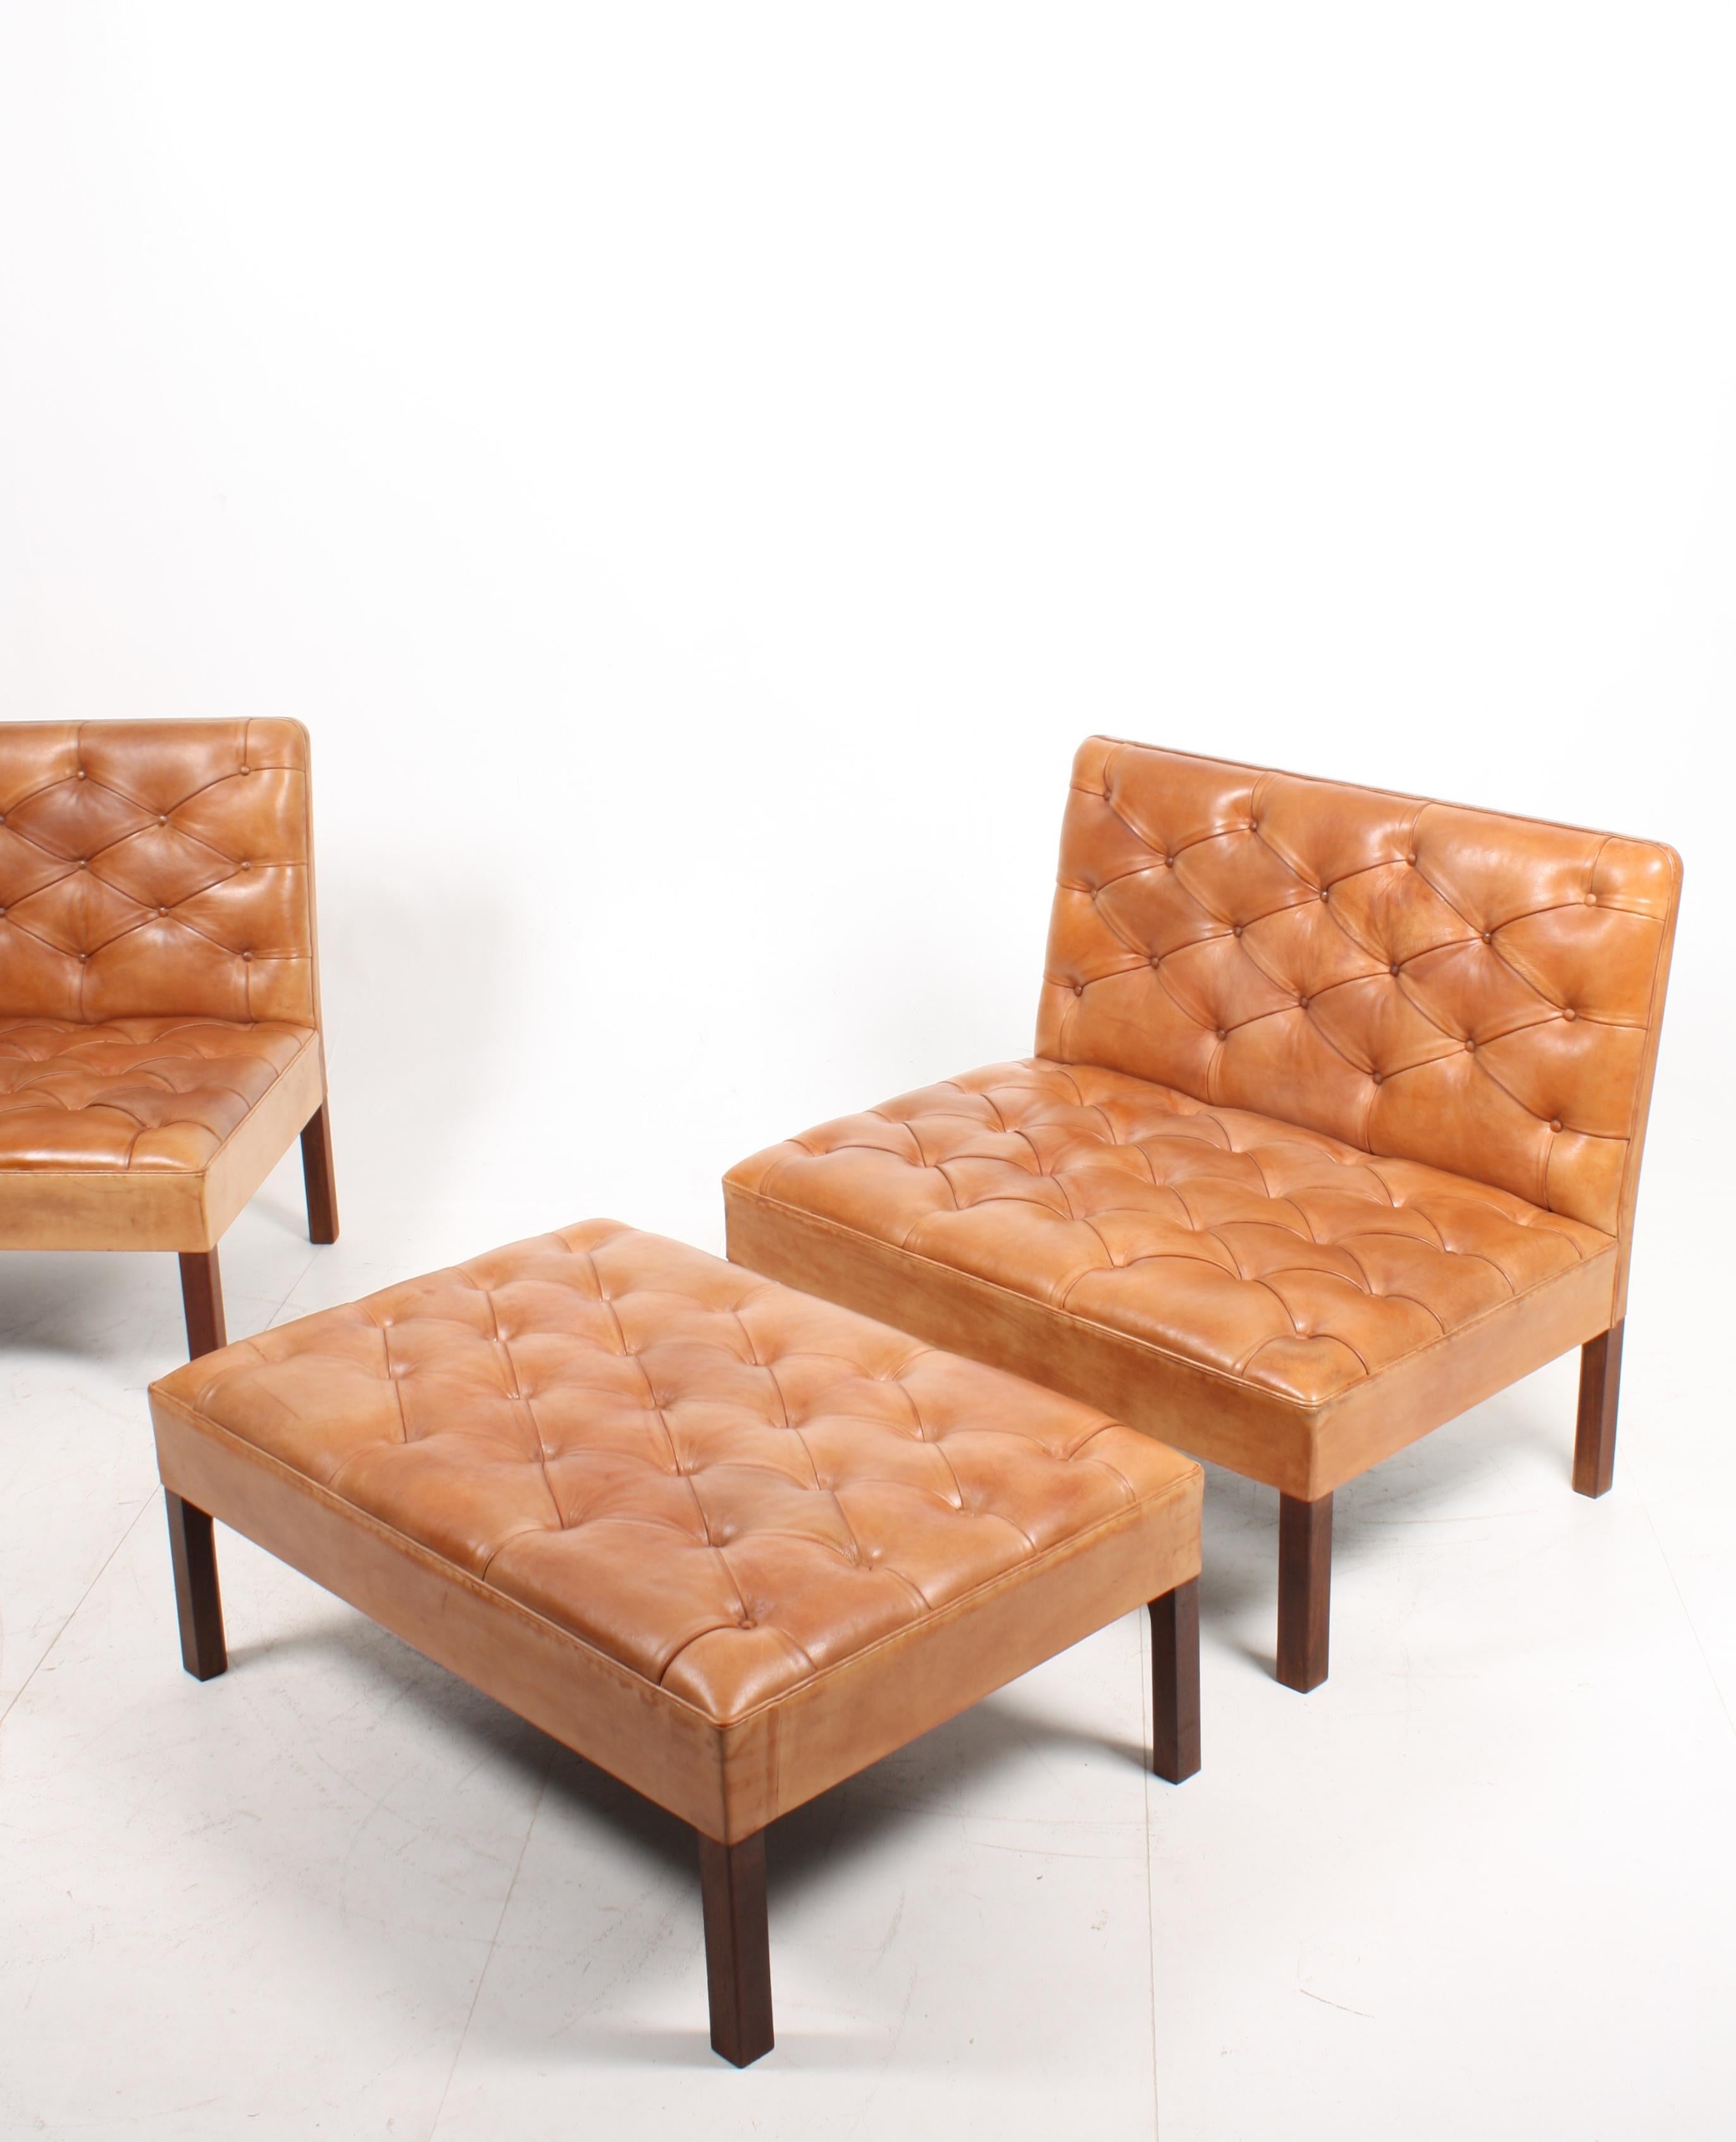 Pair of addition sofas with a matching bench in patinated leather Designed by M.A.A Kaare Klint for Rud. Rasmussen in the late 1930s. Great original condition. Made in Denmark.